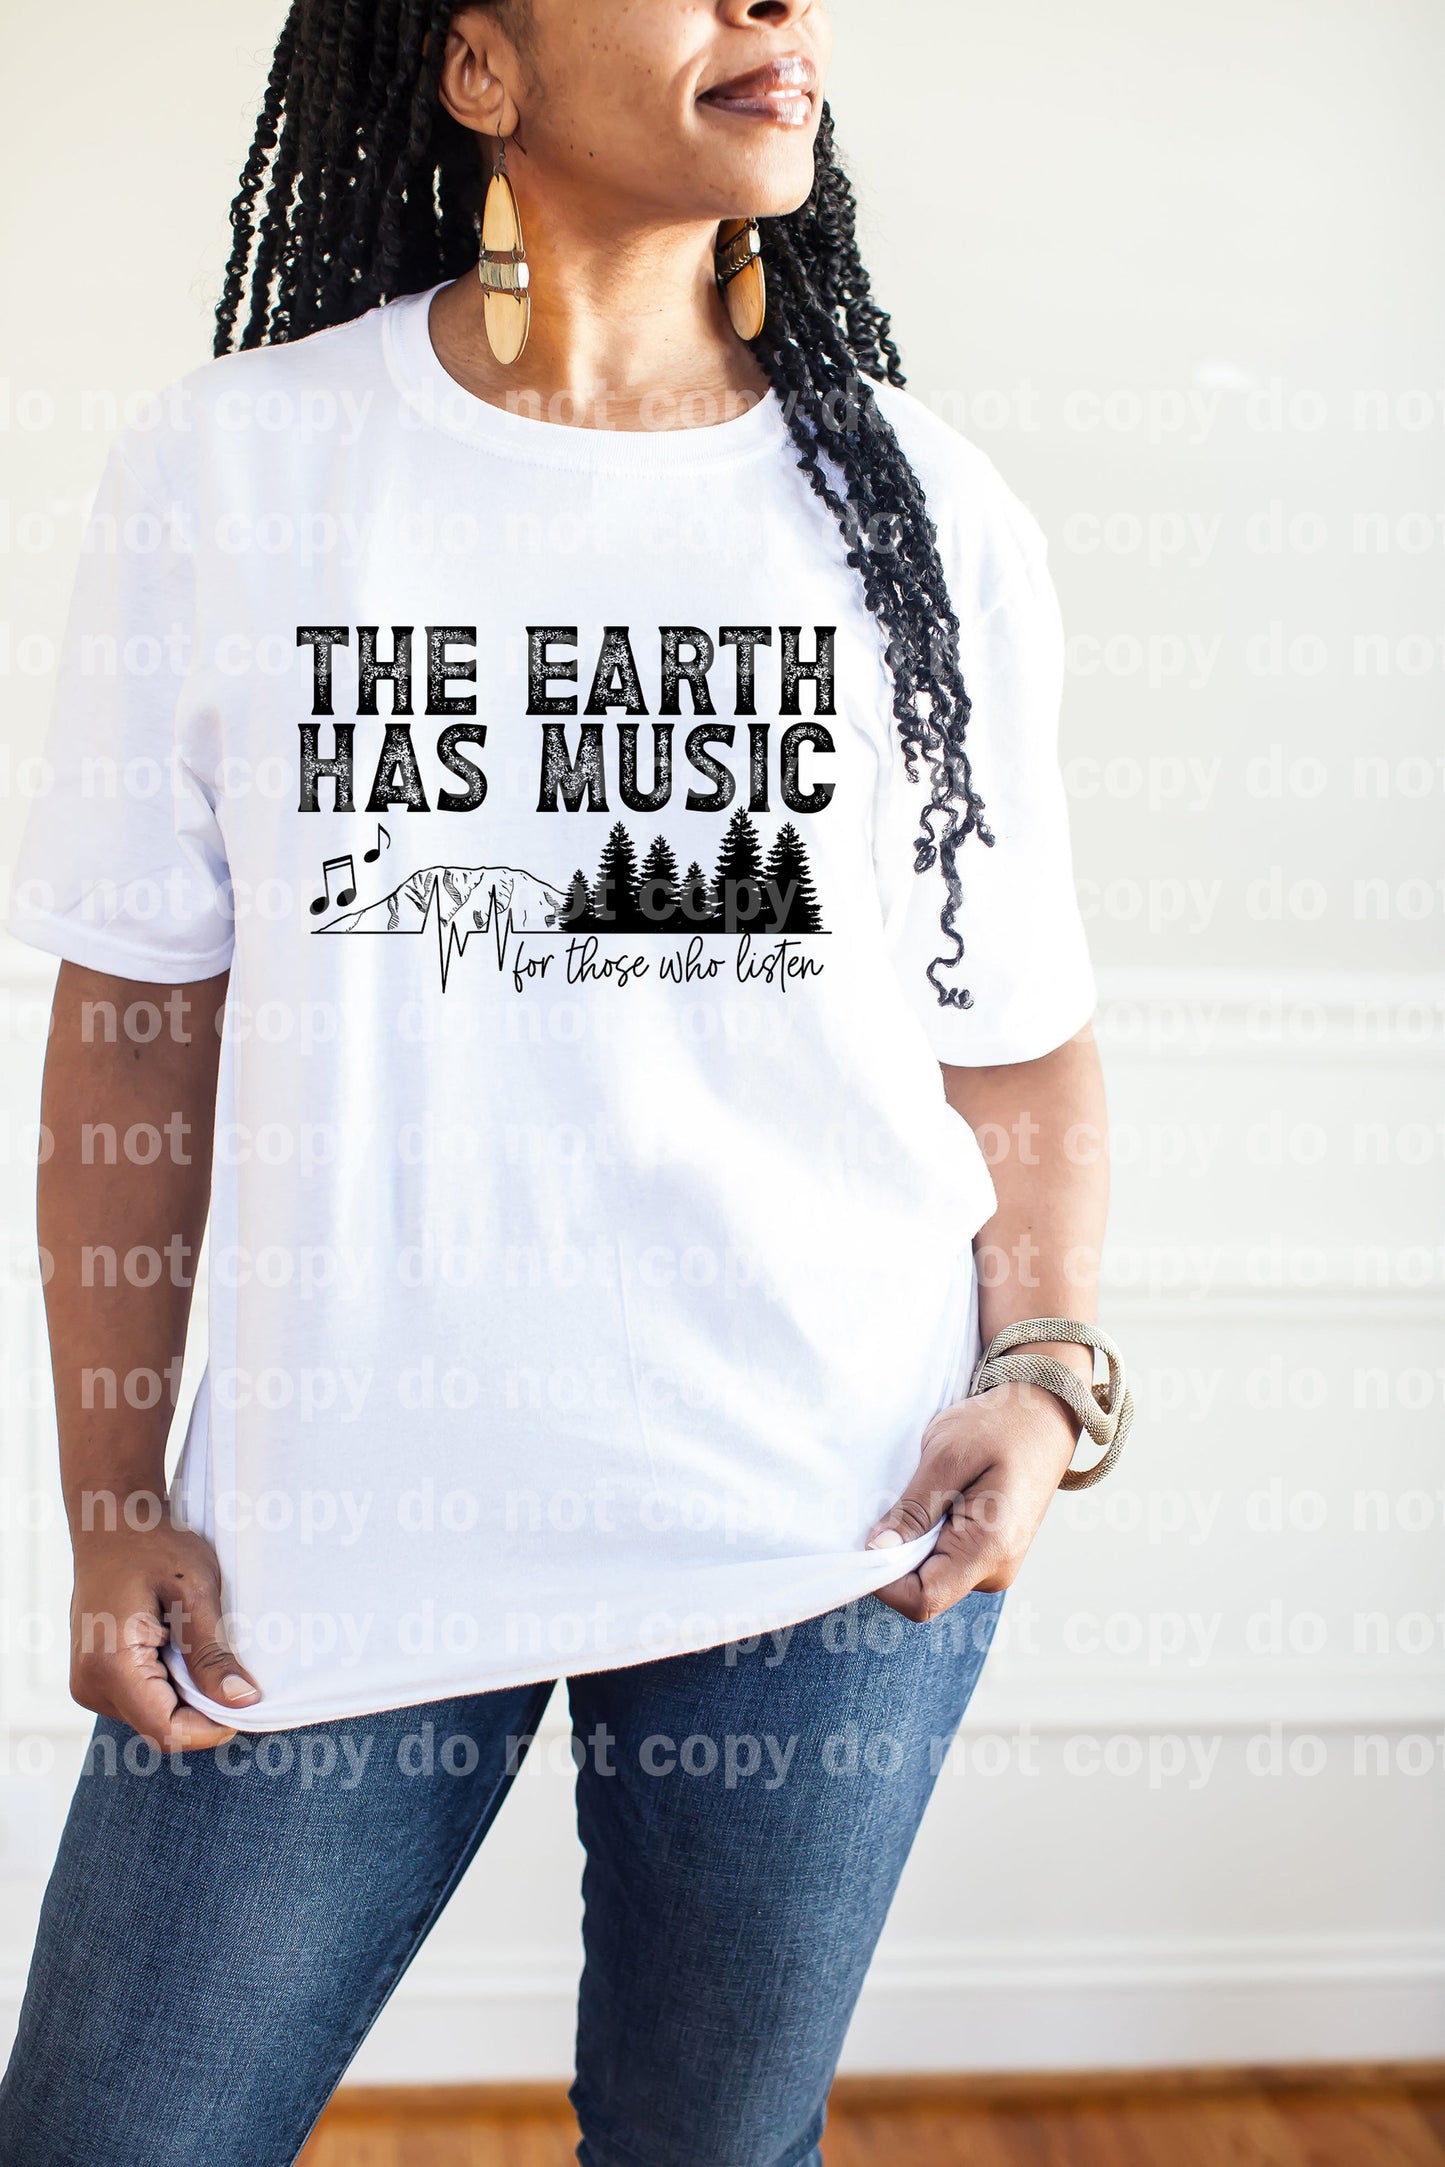 The Earth Has Music For Those Who Listen Full Color/One Color Dream Print or Sublimation Print